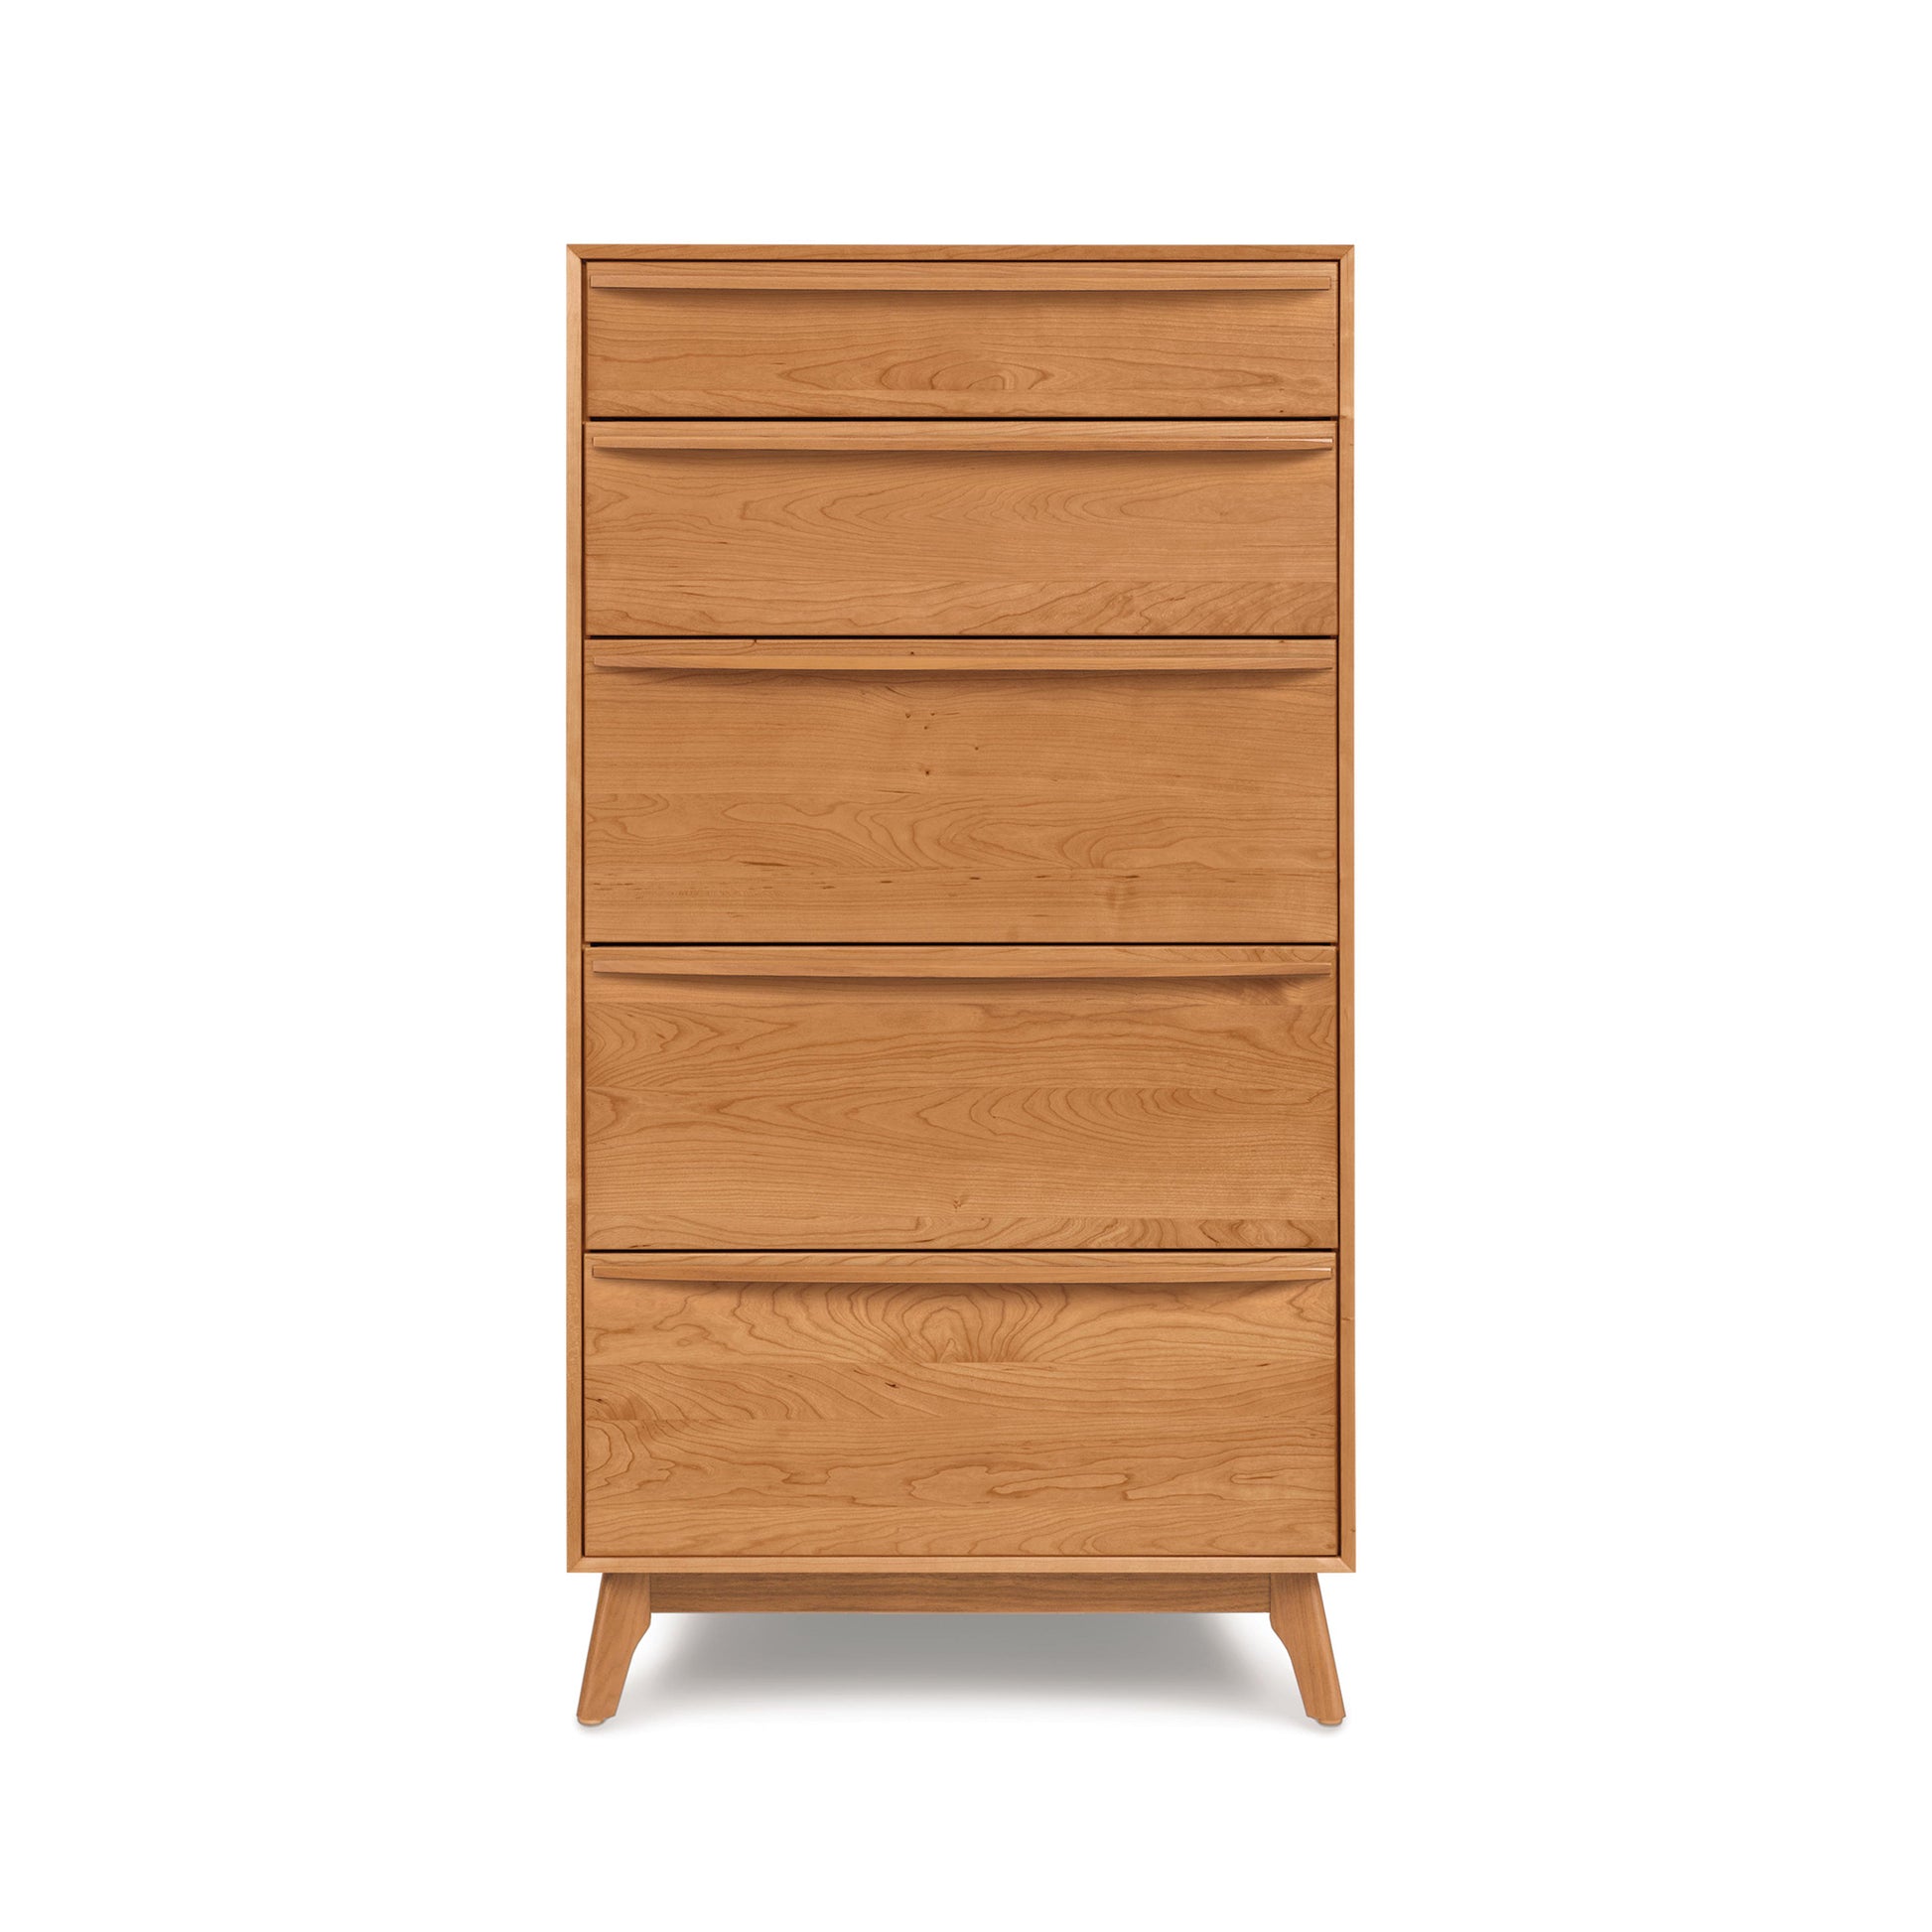 A Catalina 5-Drawer Chest from the Copeland Furniture collection standing against a white background.